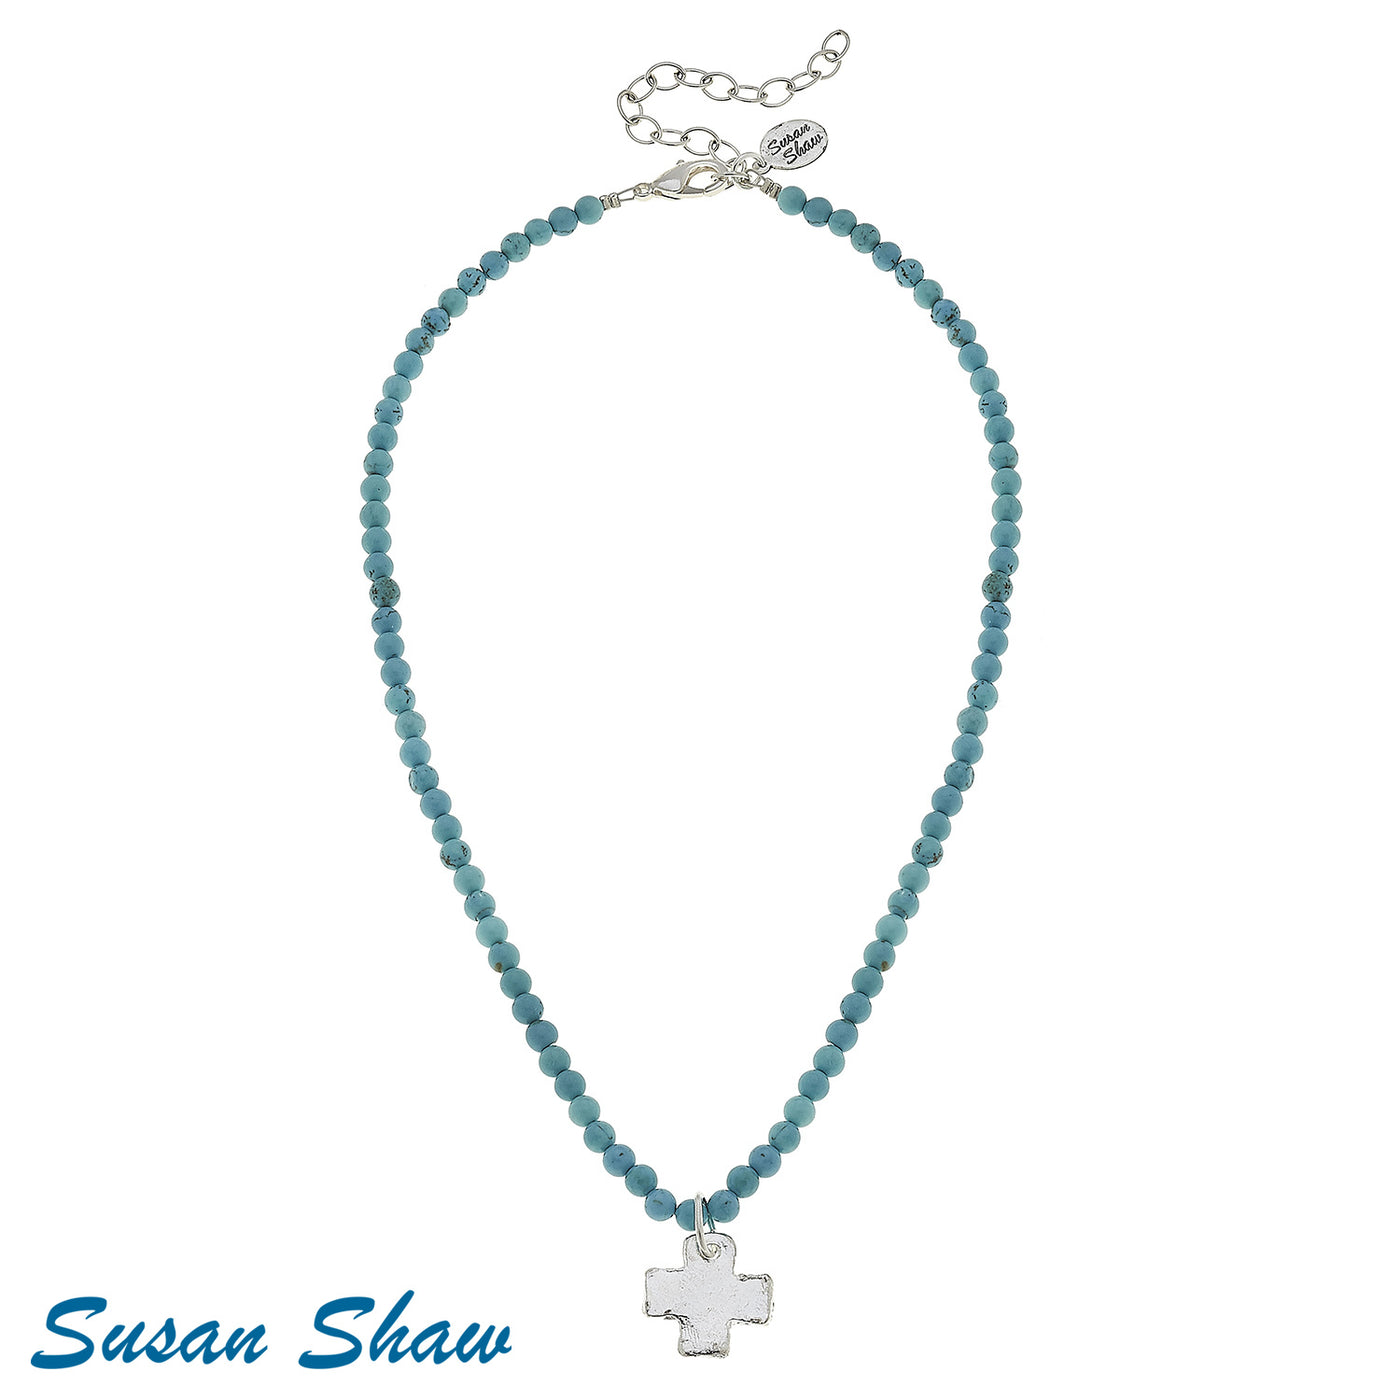 Silver Cross on Turquoise Beaded Necklace - Susan Shaw